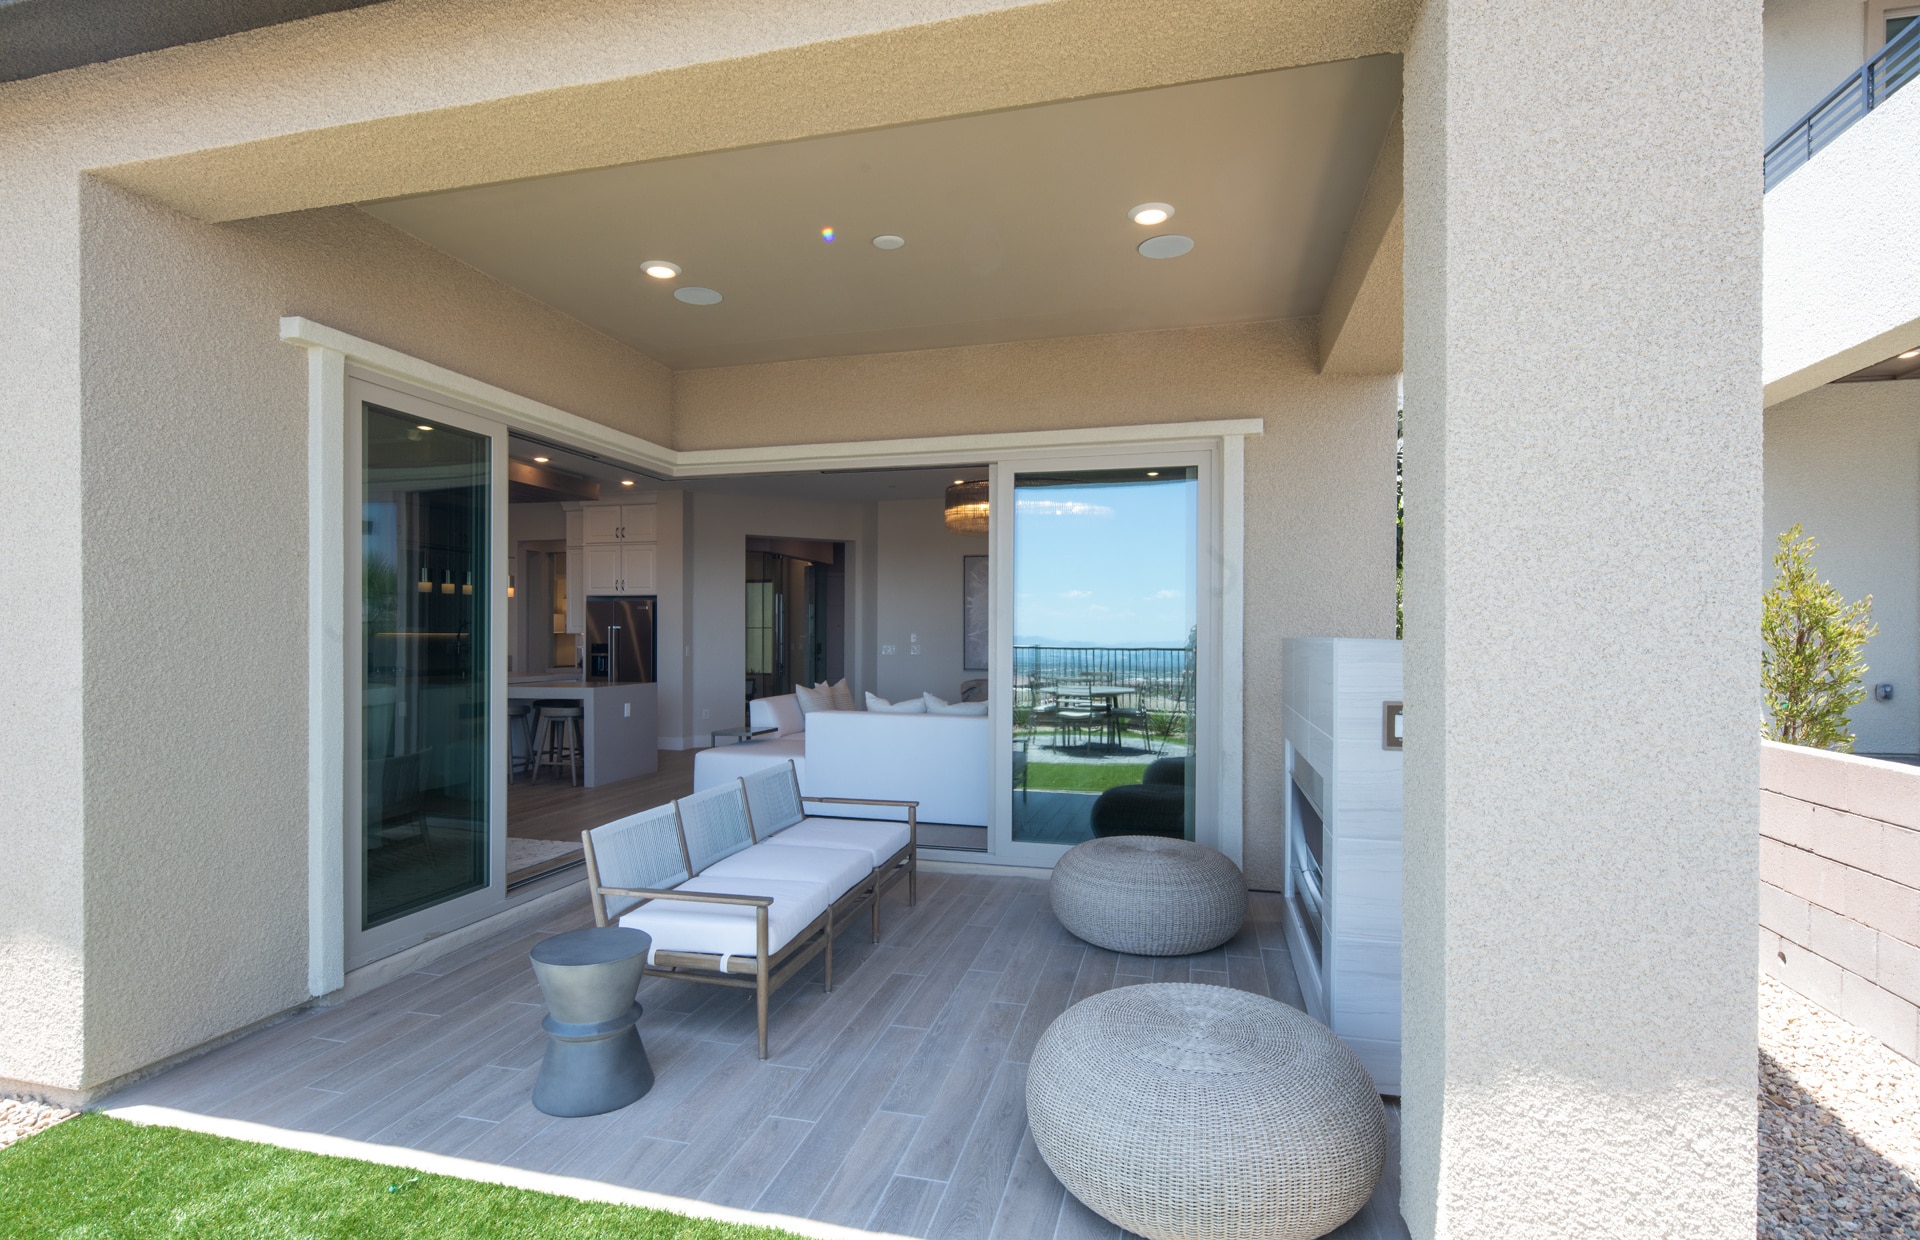 Backyard of Cesena Model at Carmel Cliff by Pulte Homes